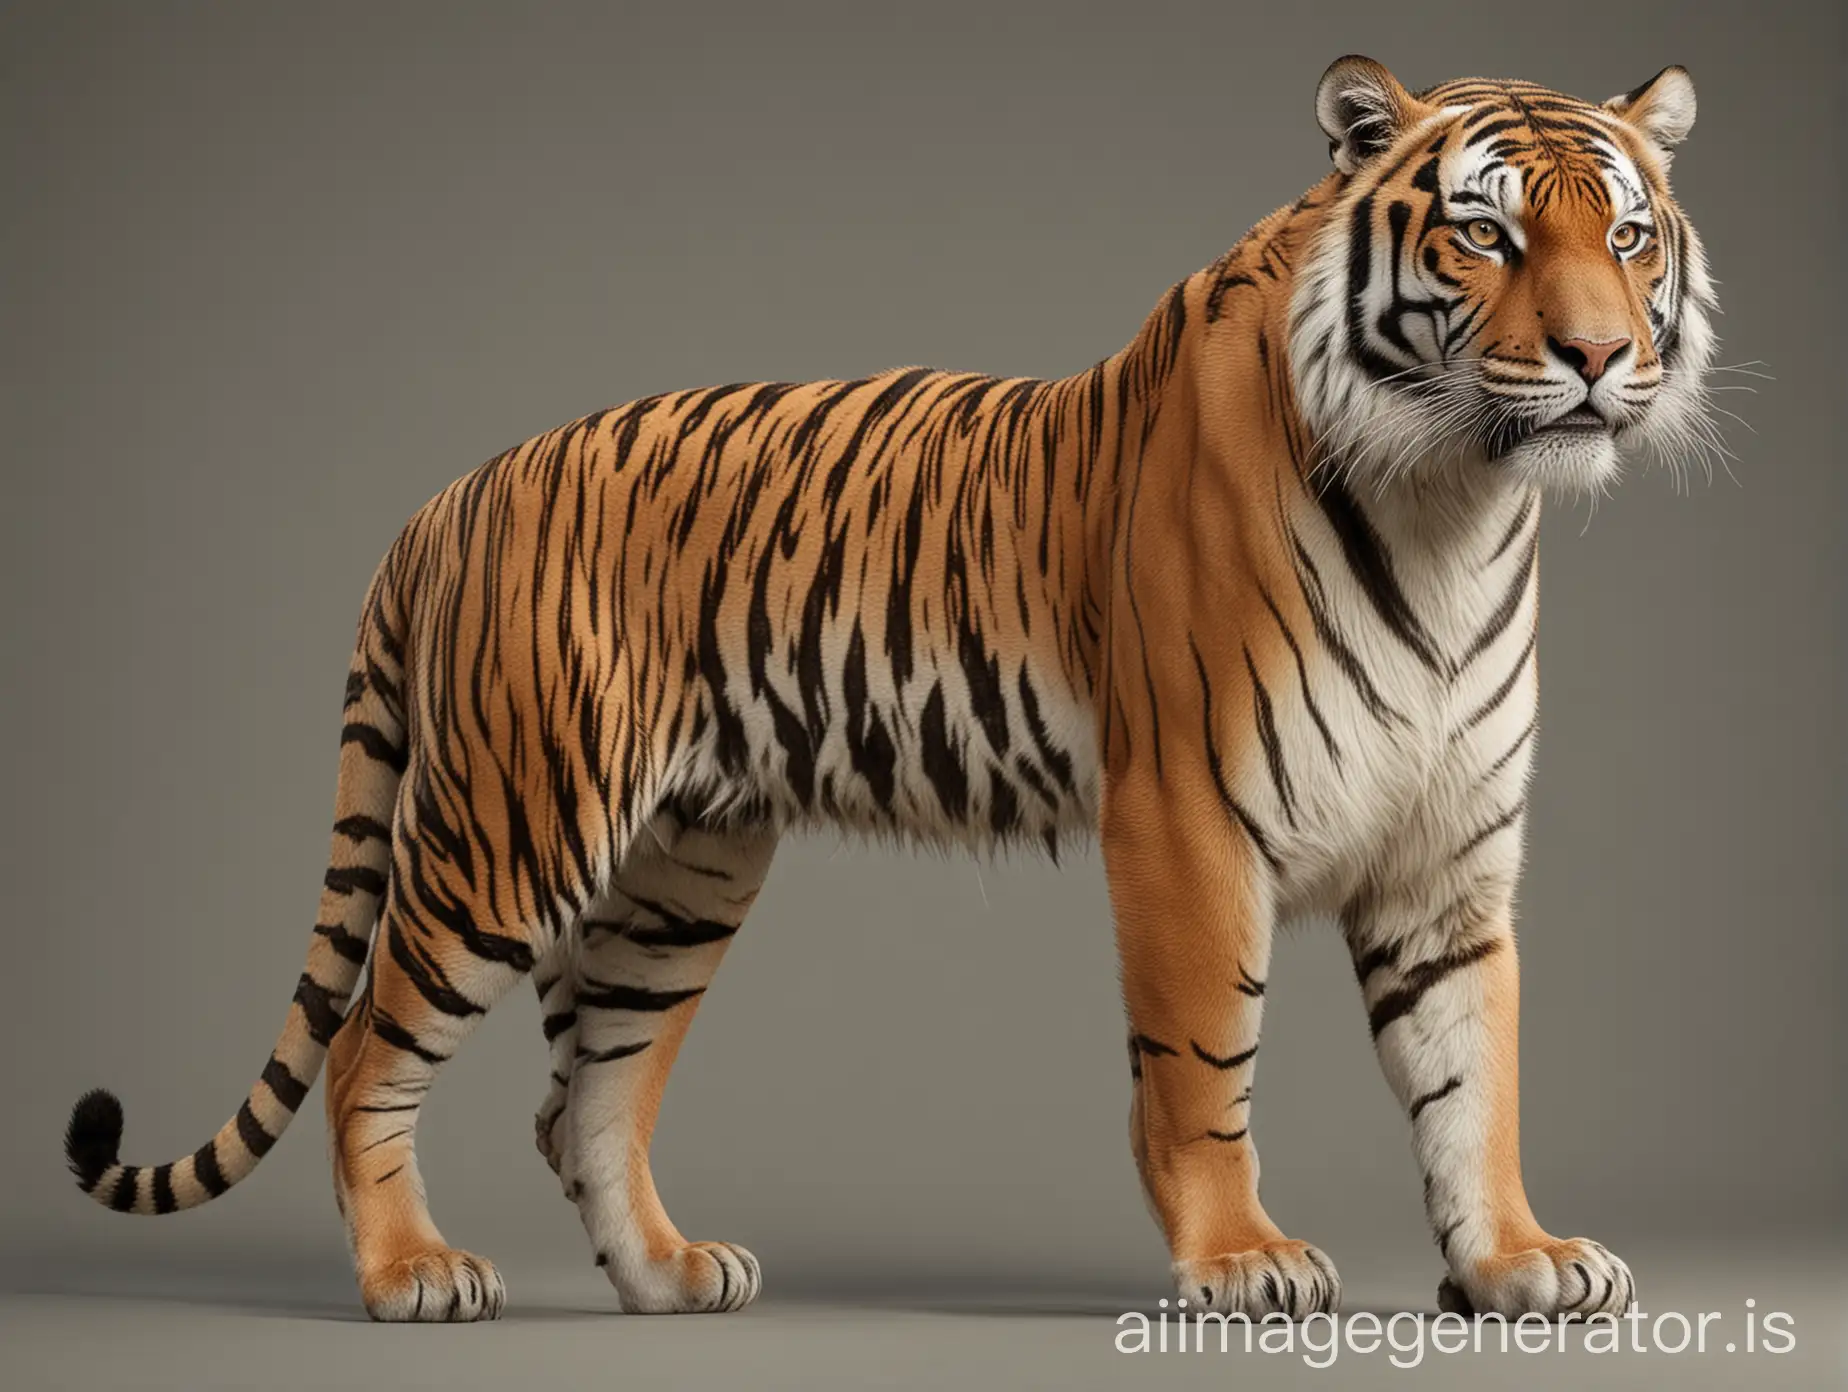 Realistic-Male-and-Female-Tigers-in-Various-Poses-on-Neutral-Background